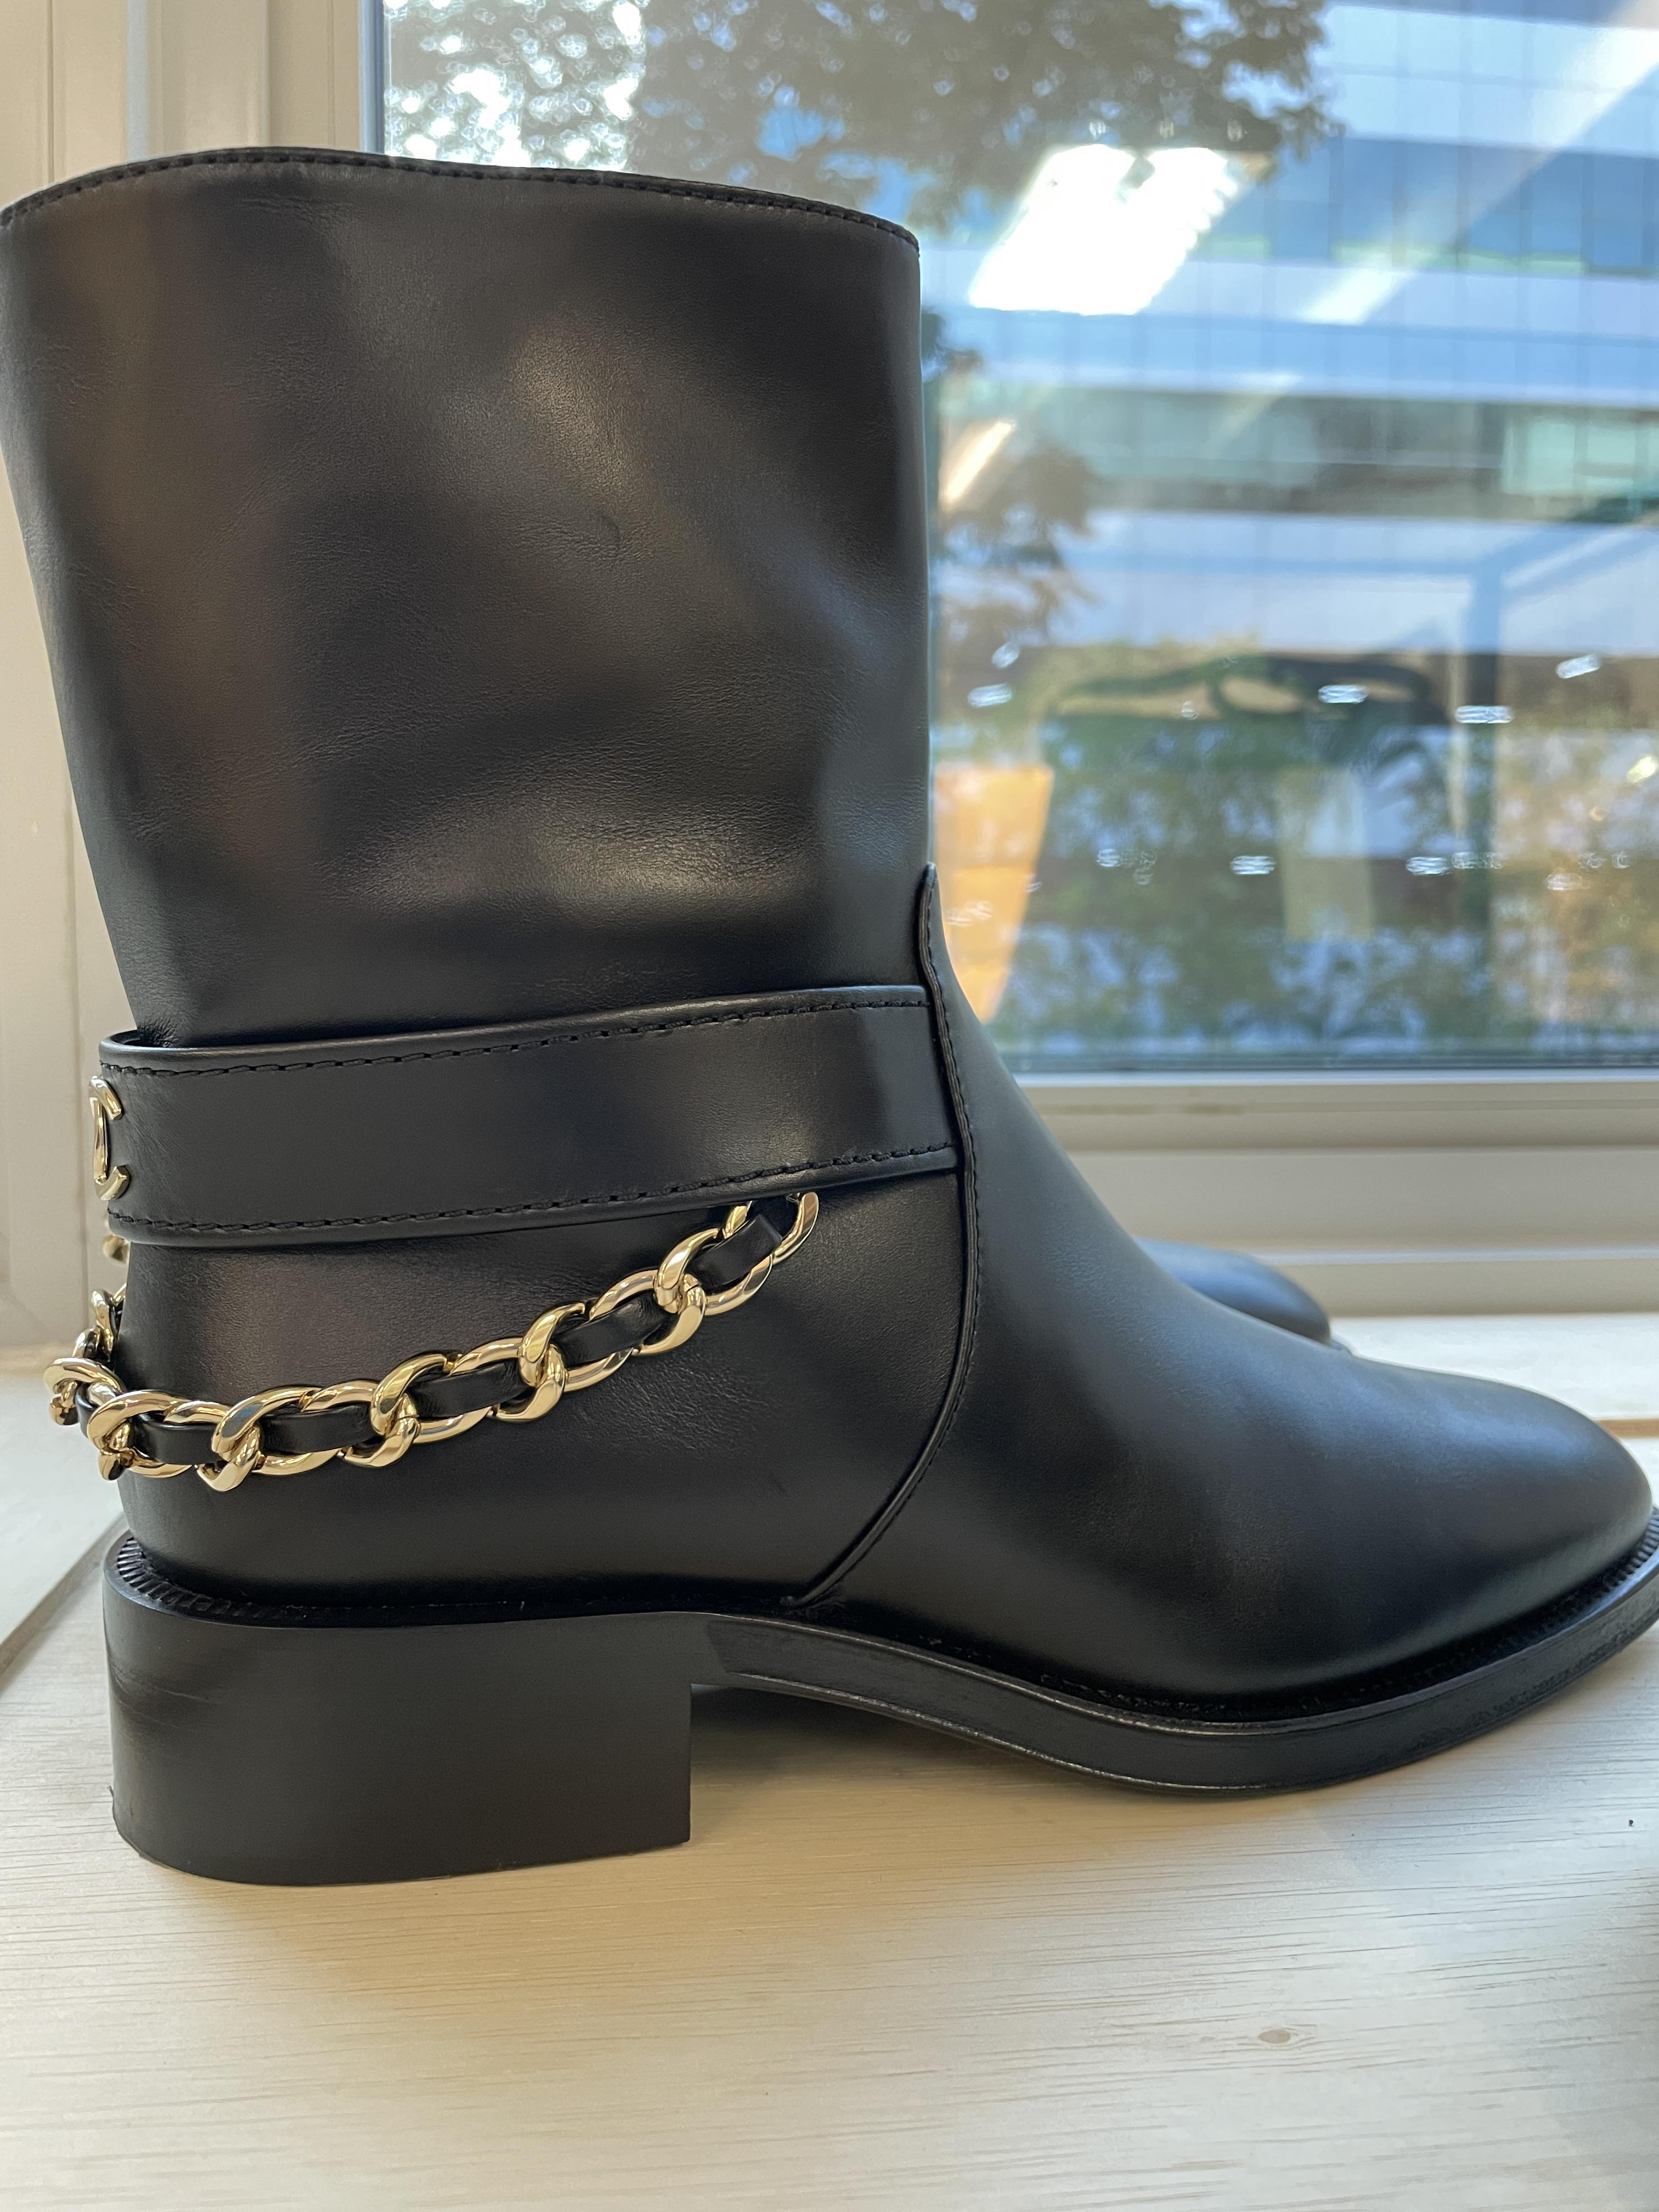 A PAIR OF CHANEL LEATHER ANKLE MOTO BOOTS - Image 5 of 12